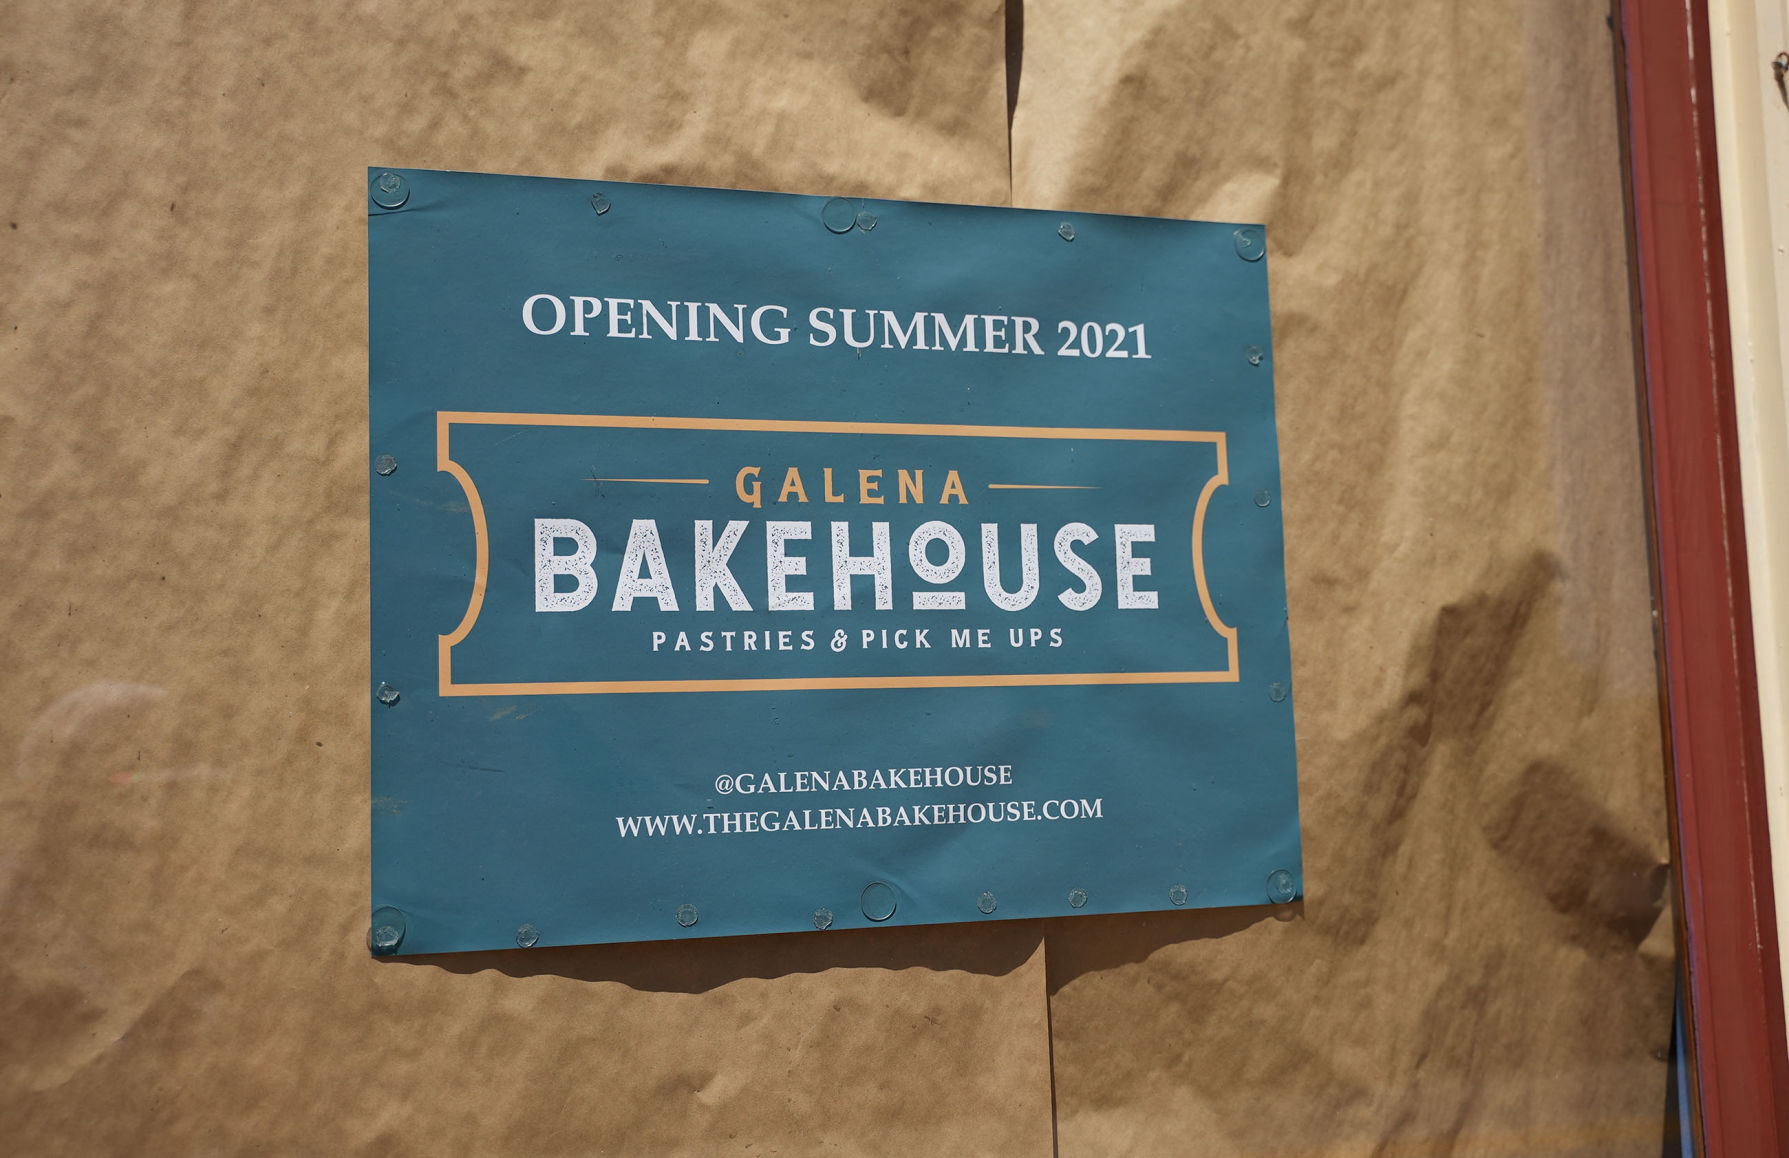 The storefront of Galena Bakehouse at 421 S. Main St. in Galena, Ill. Owners, Alex Arroyo and Geoff Karnish plan to be open for business in early August. Photo taken on Saturday, June 19, 2021.    PHOTO CREDIT: PAUL KURUTSIDES